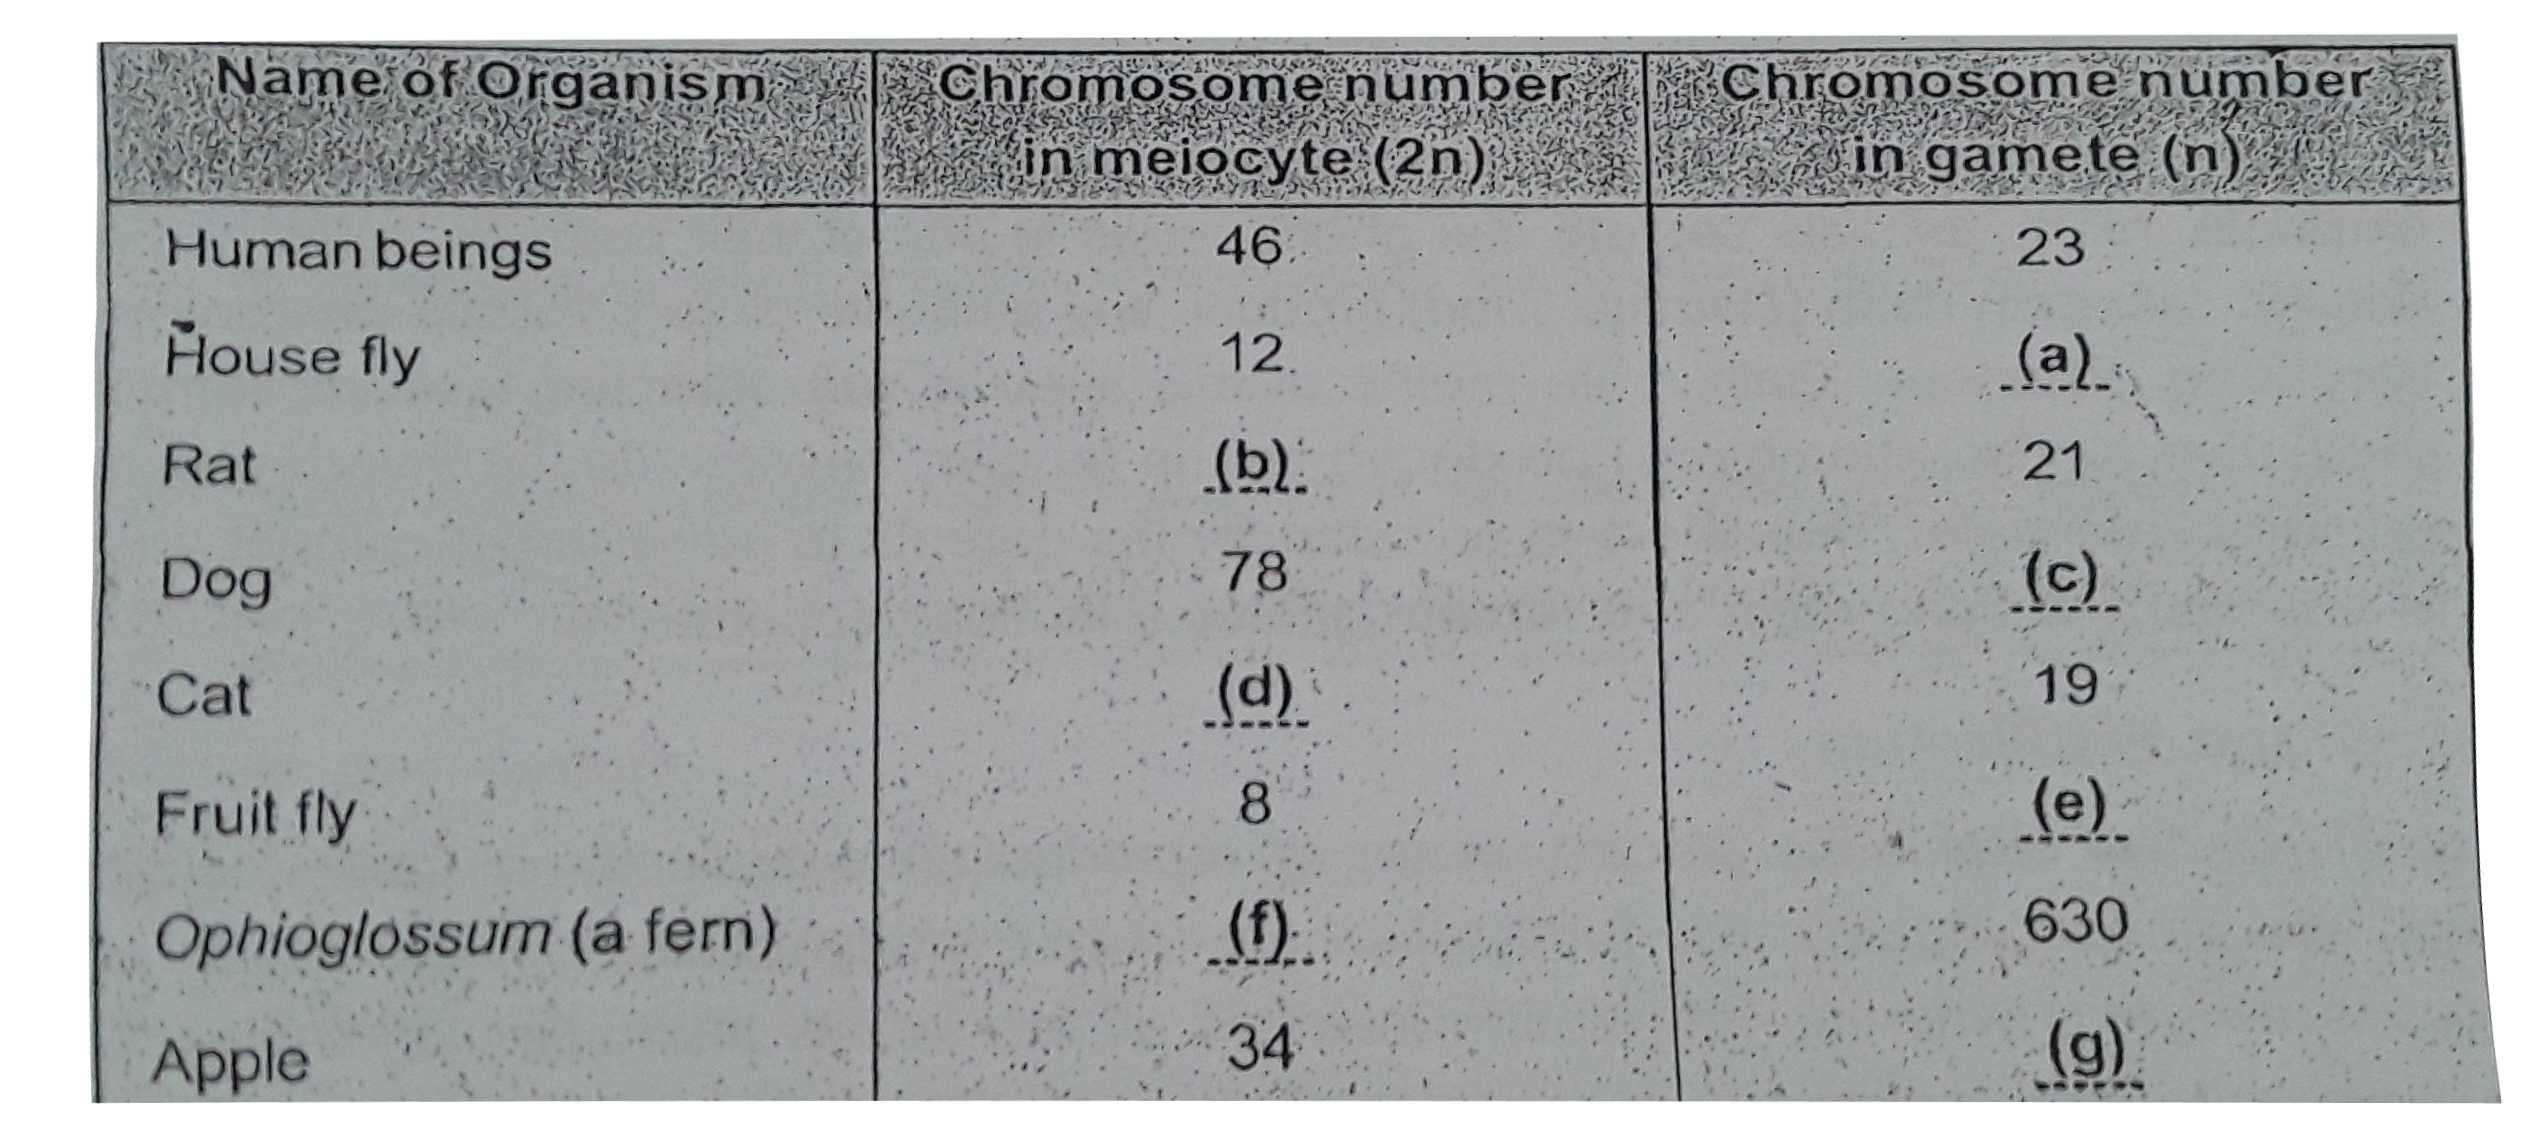 Chromosome numbers in meiocytes (diploid,2n) and gamates (haploid ,n) of some organisms are given below. Fill in the spaces.